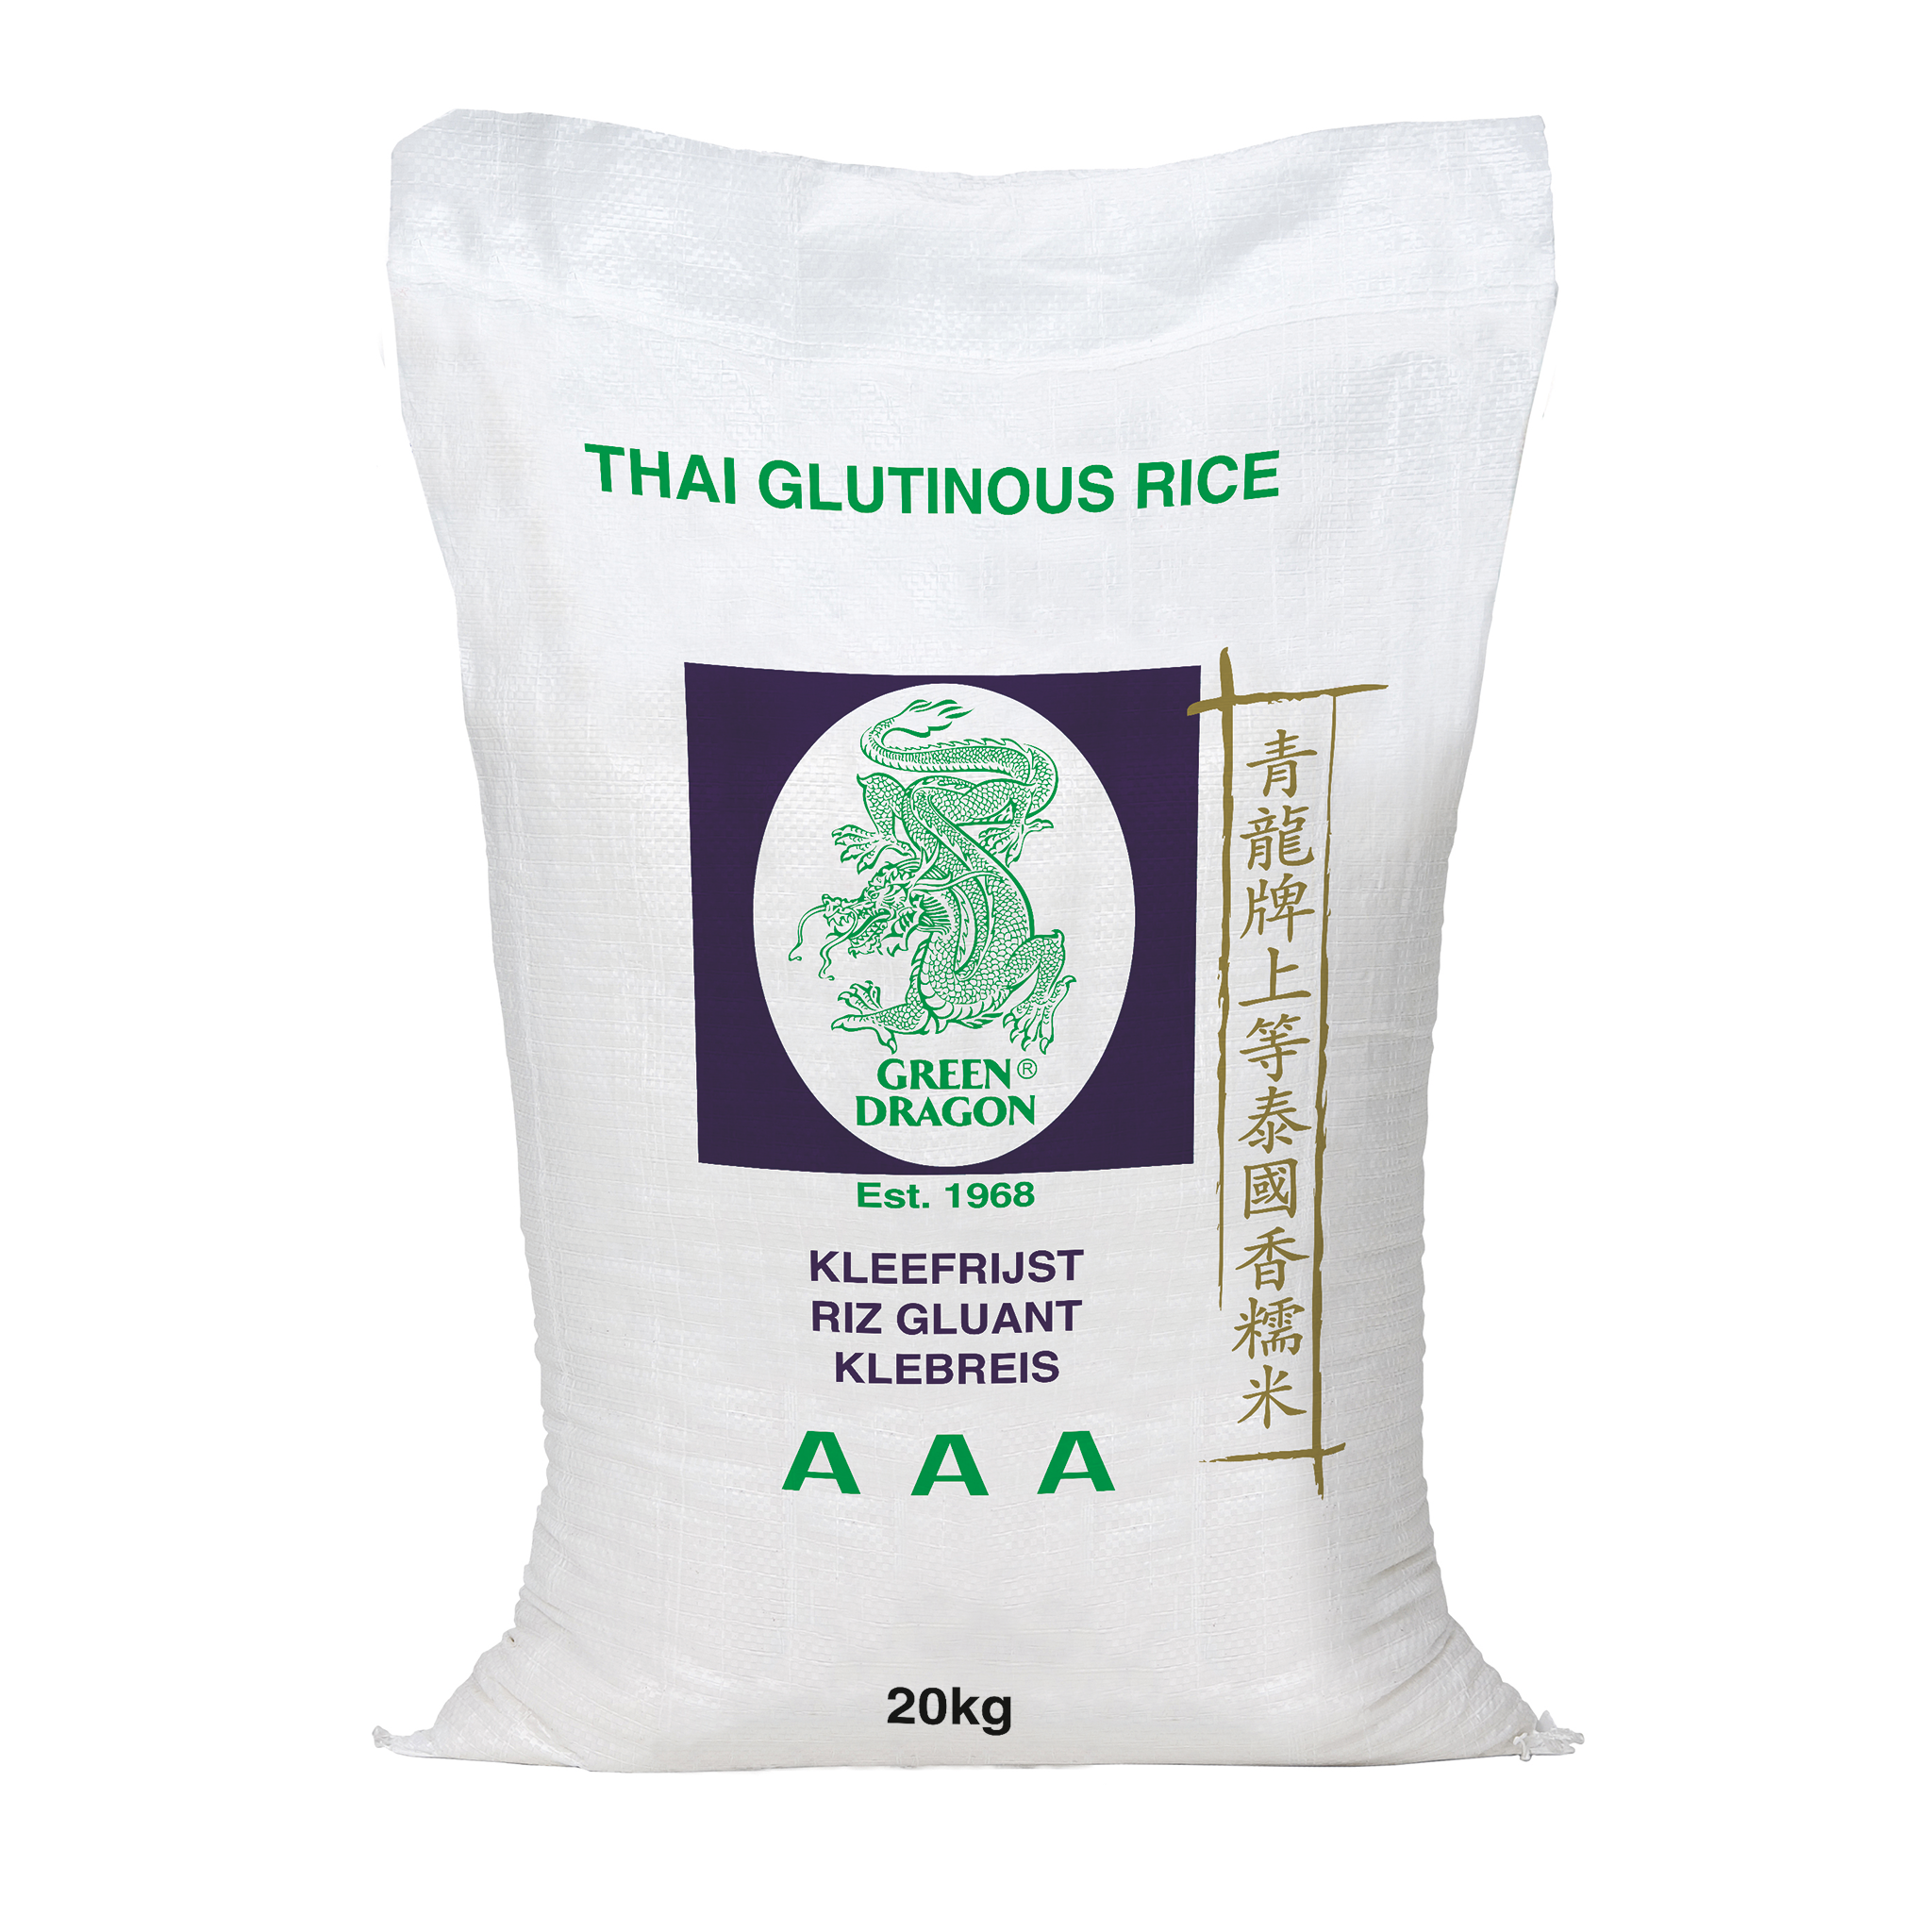 Glutinous Sticky Rice 20kg by Green Dragon